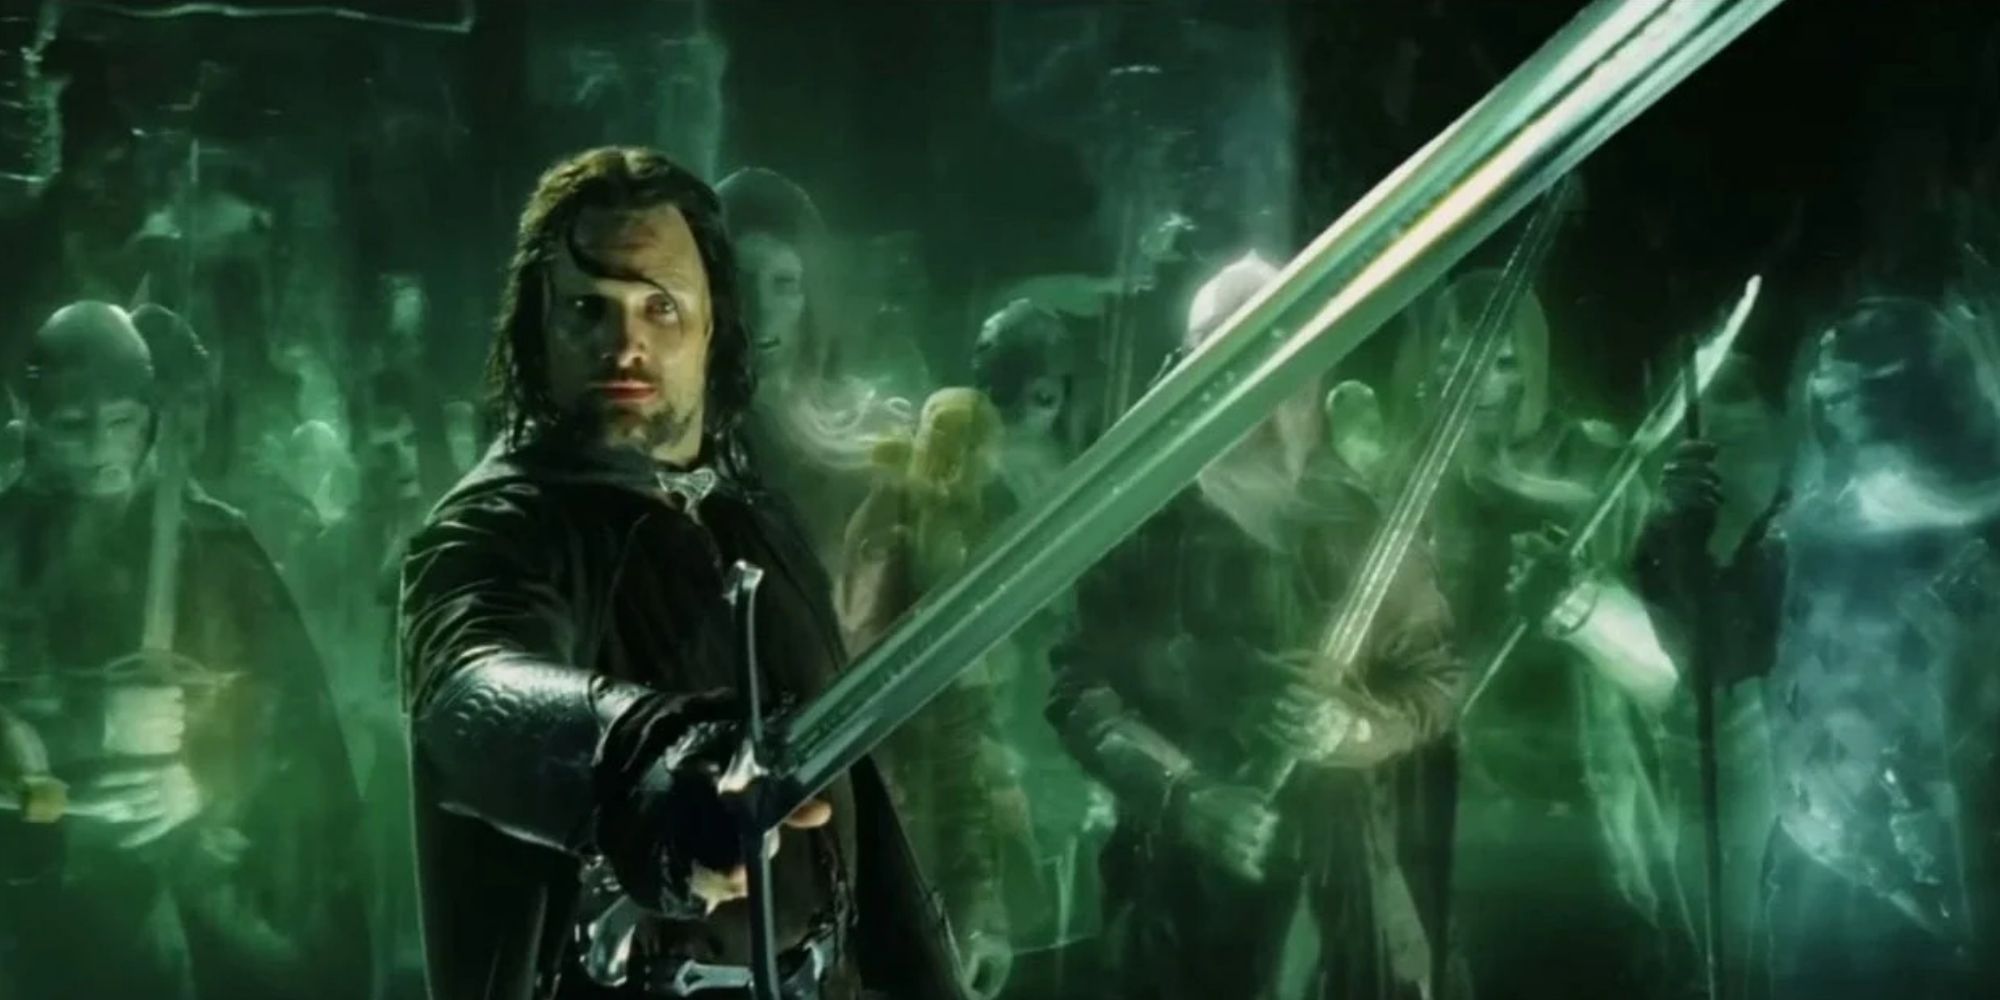 Aragorn holding his sword Andúril surrounded by ghosts in 'The Lord of the Rings: The Return of the King' 